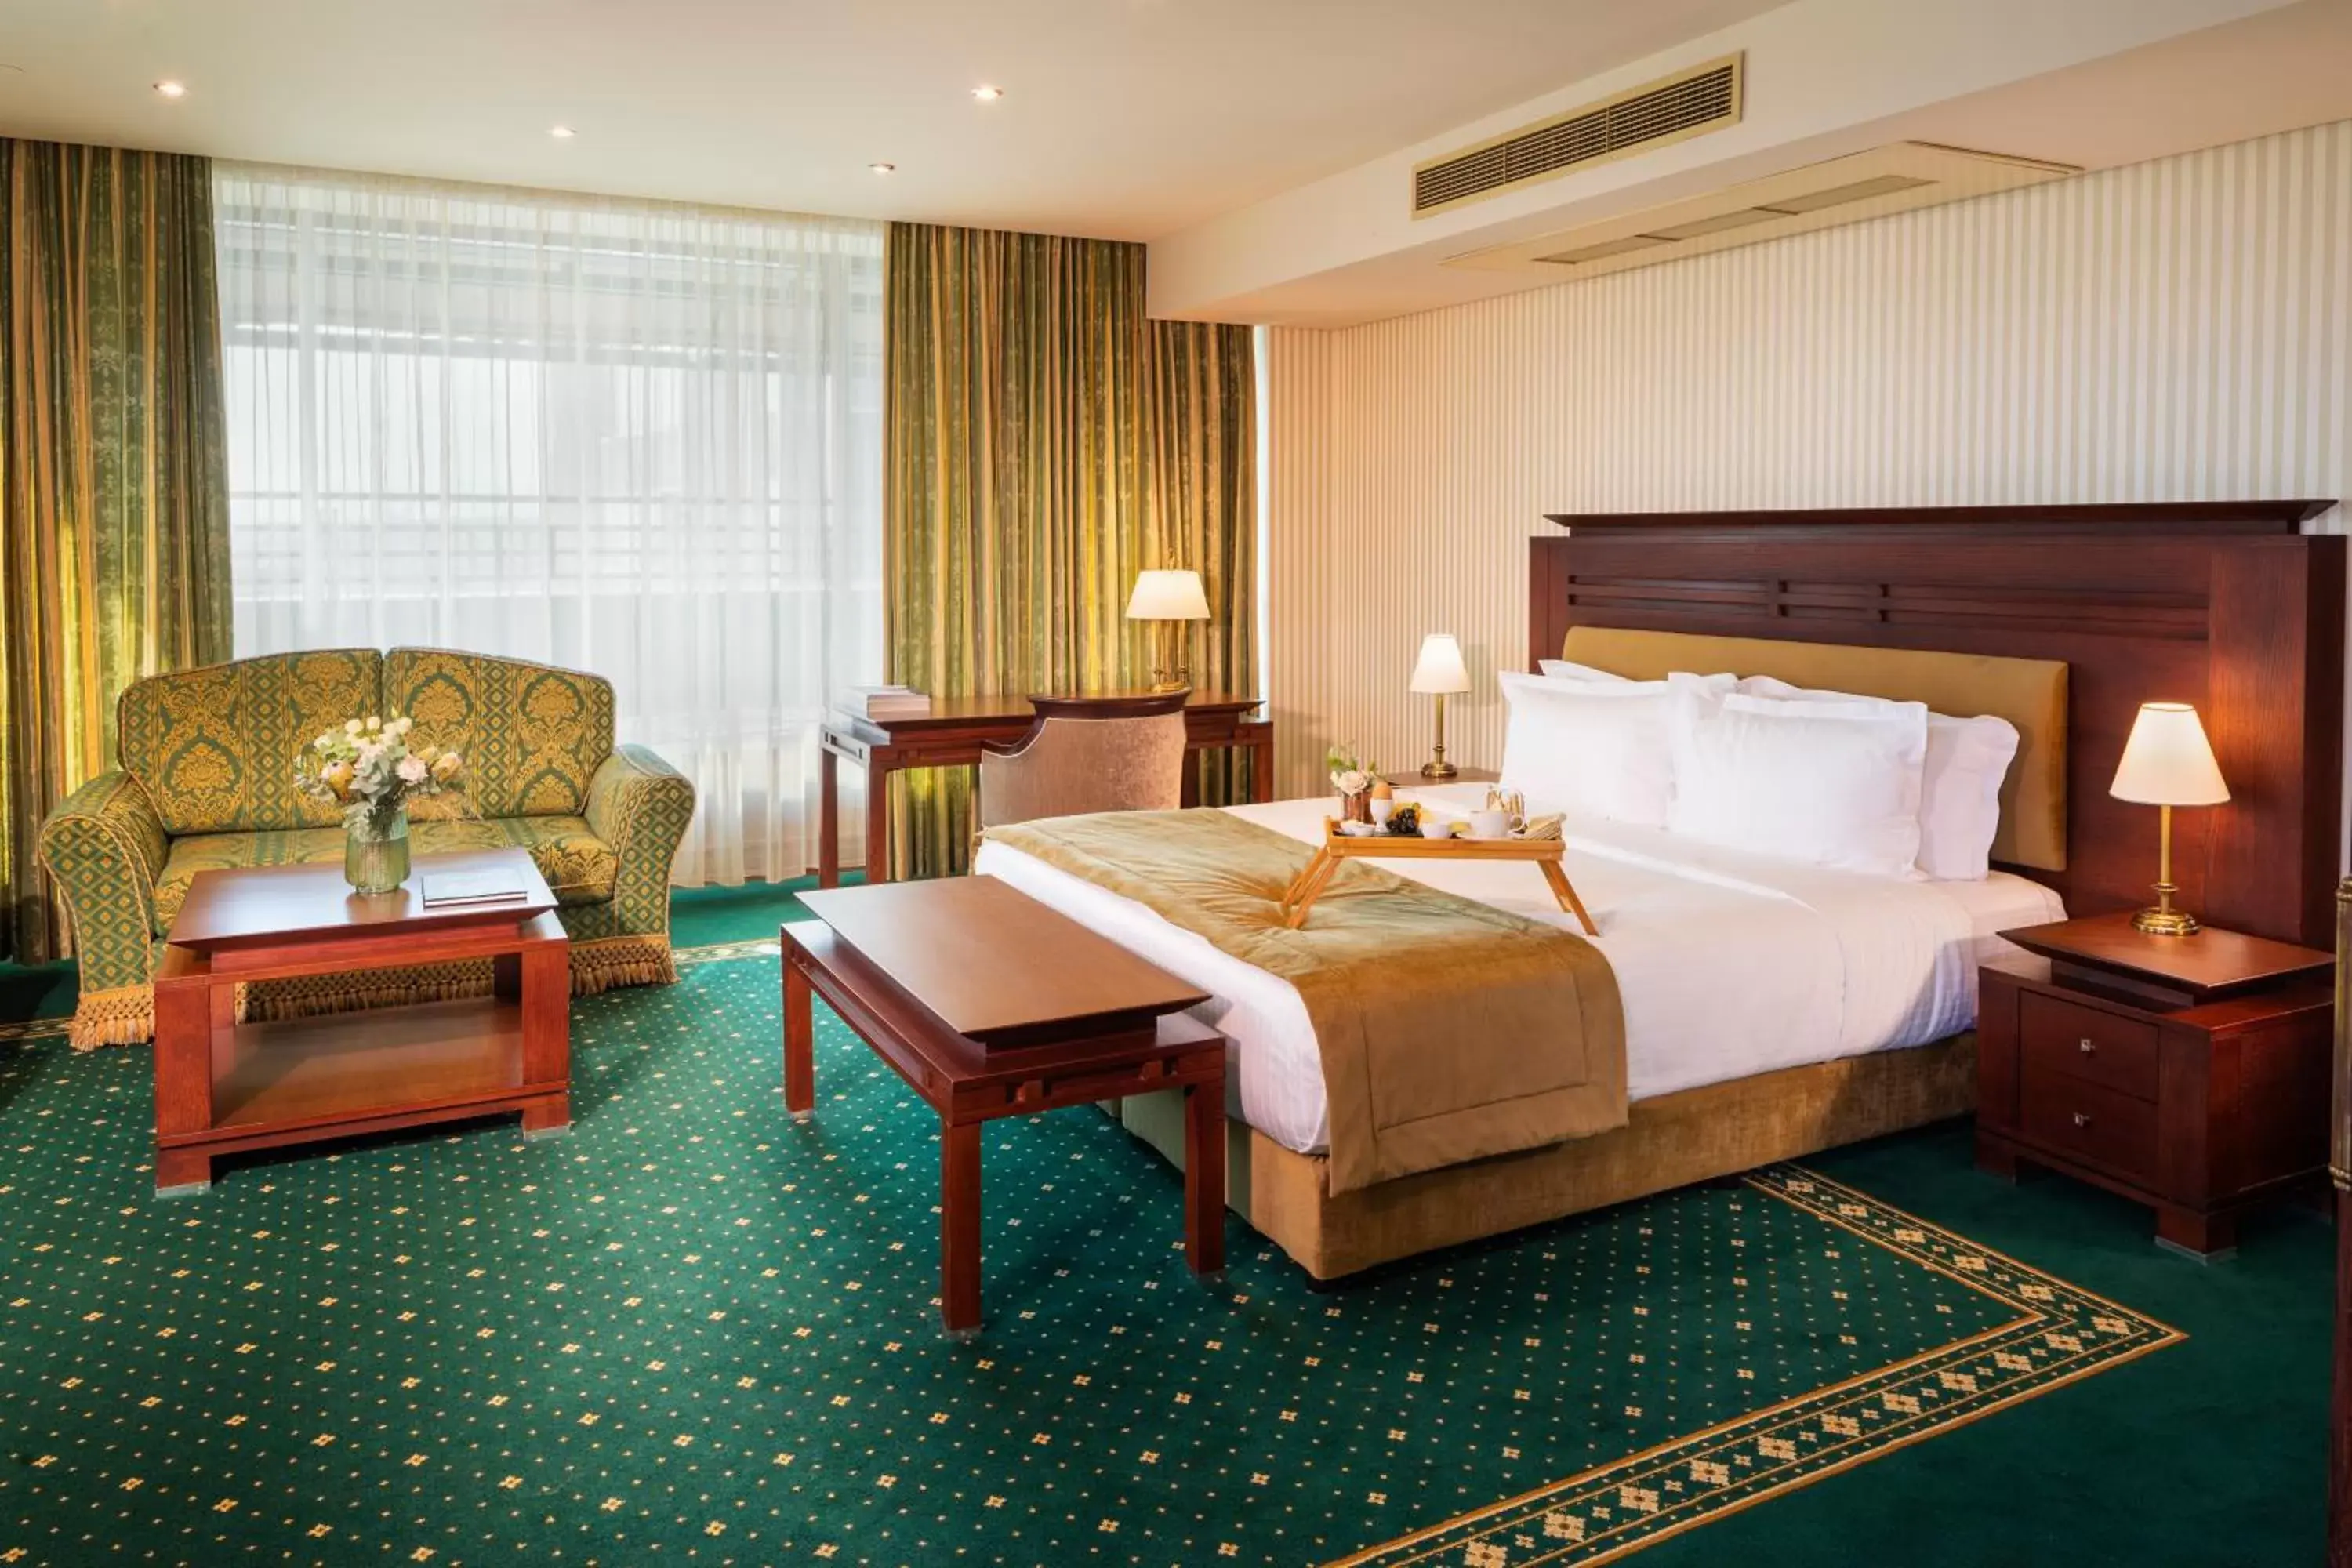 Bedroom in Grand Hotel Sofia - Top Location, The Most Spacious Rooms in the City, Secured Paid Underground Parking